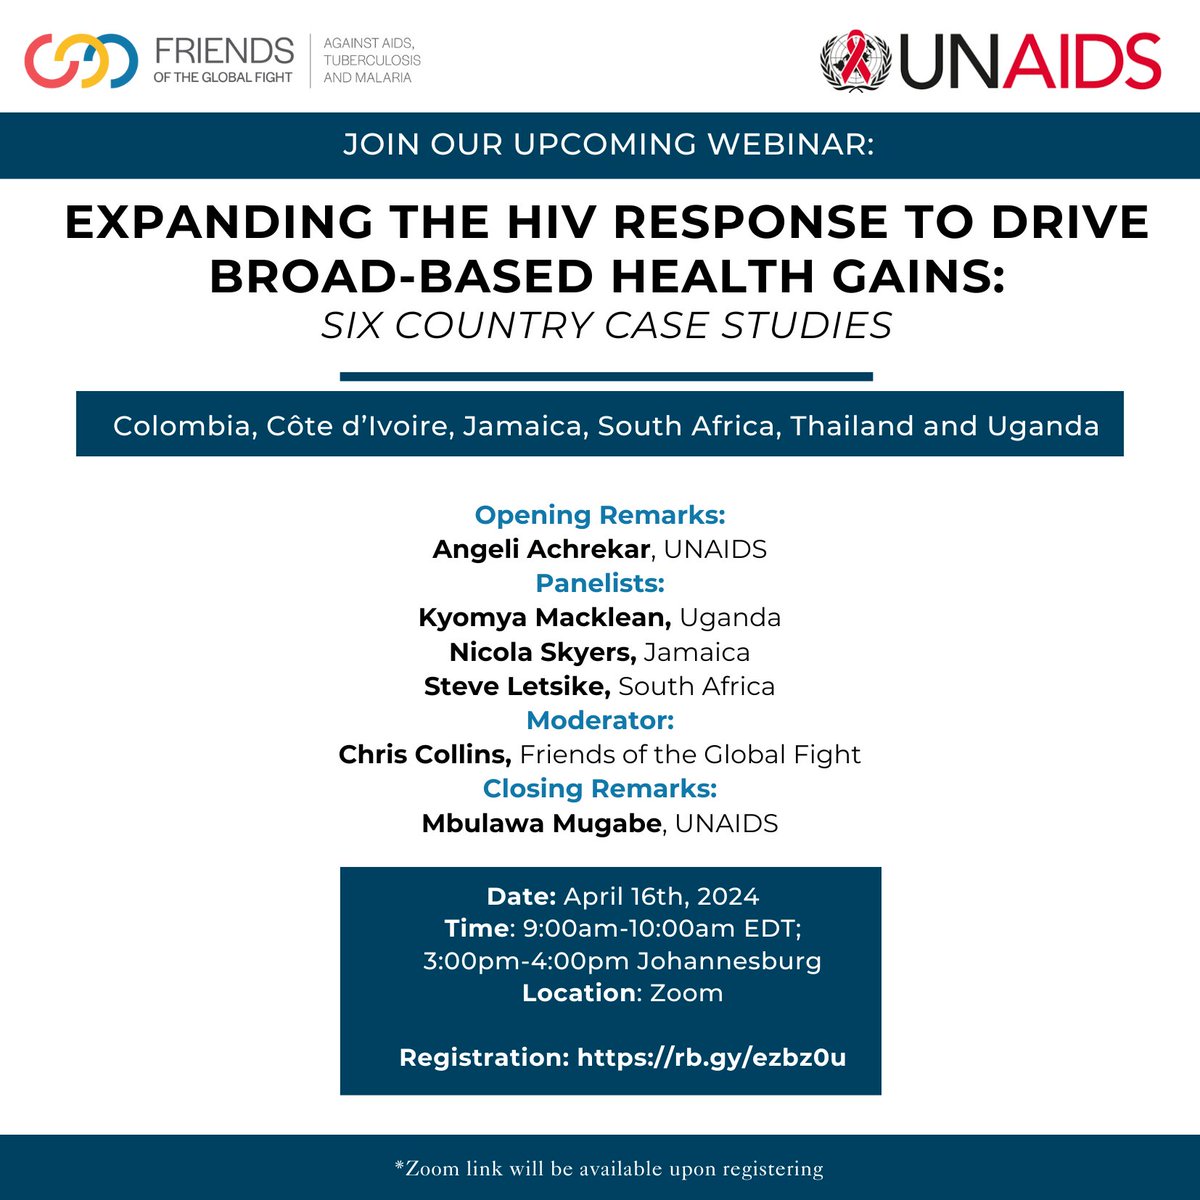 Join @UNAIDS & @theglobalfight's webinar on how expanding the HIV response can drive broad-based health gains. Experts will discuss how HIV initiatives drive progress towards ending AIDS & achieving universal health coverage. 📅 16 April, 3:00pm CET 🔗 ow.ly/2EzC50Raknm